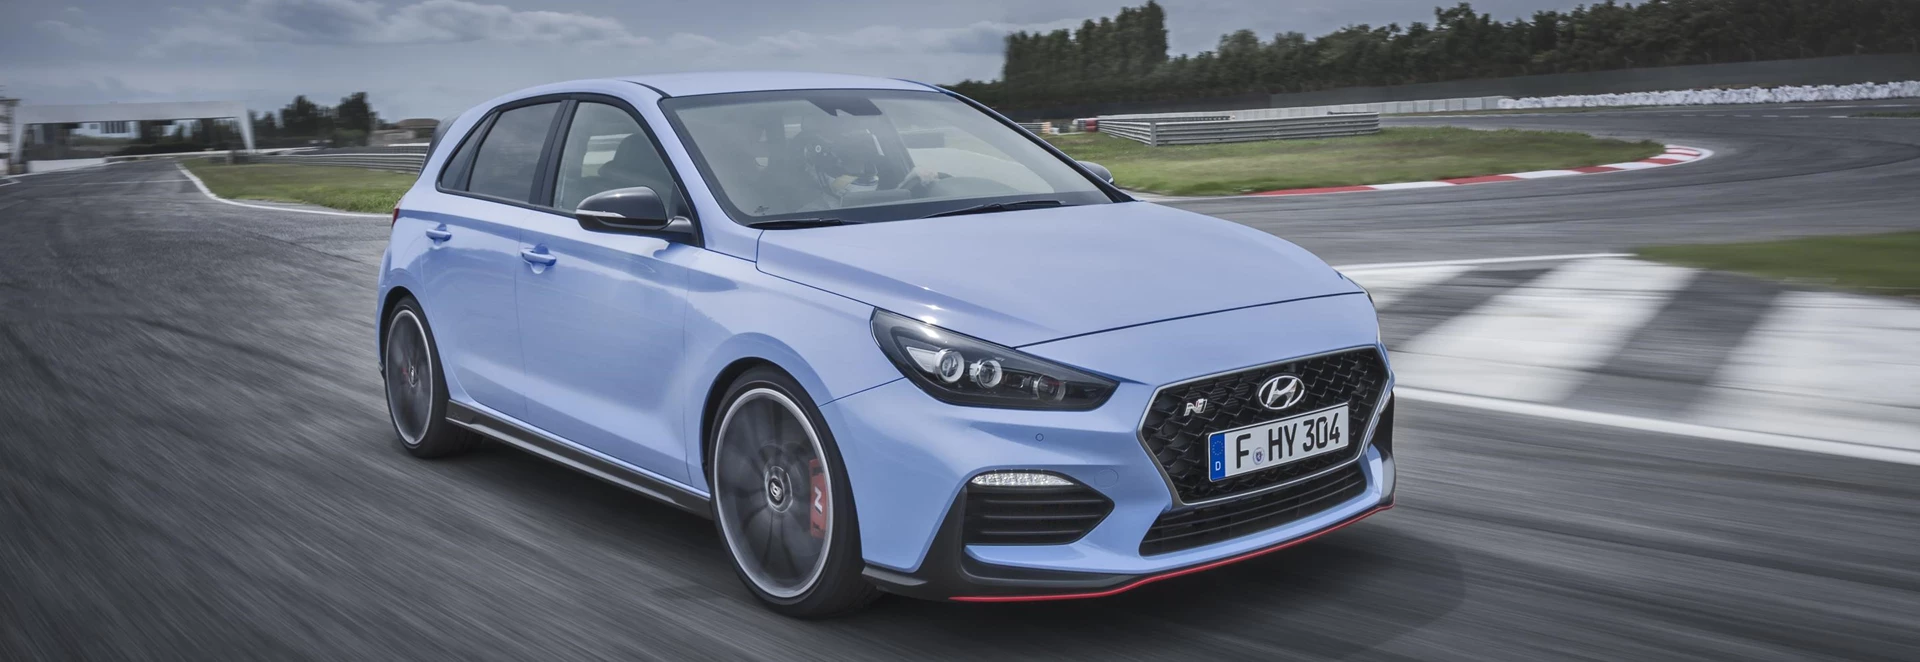 Hyundai i30N: 271bhp Golf GTi rival officially unveiled, on sale this year 